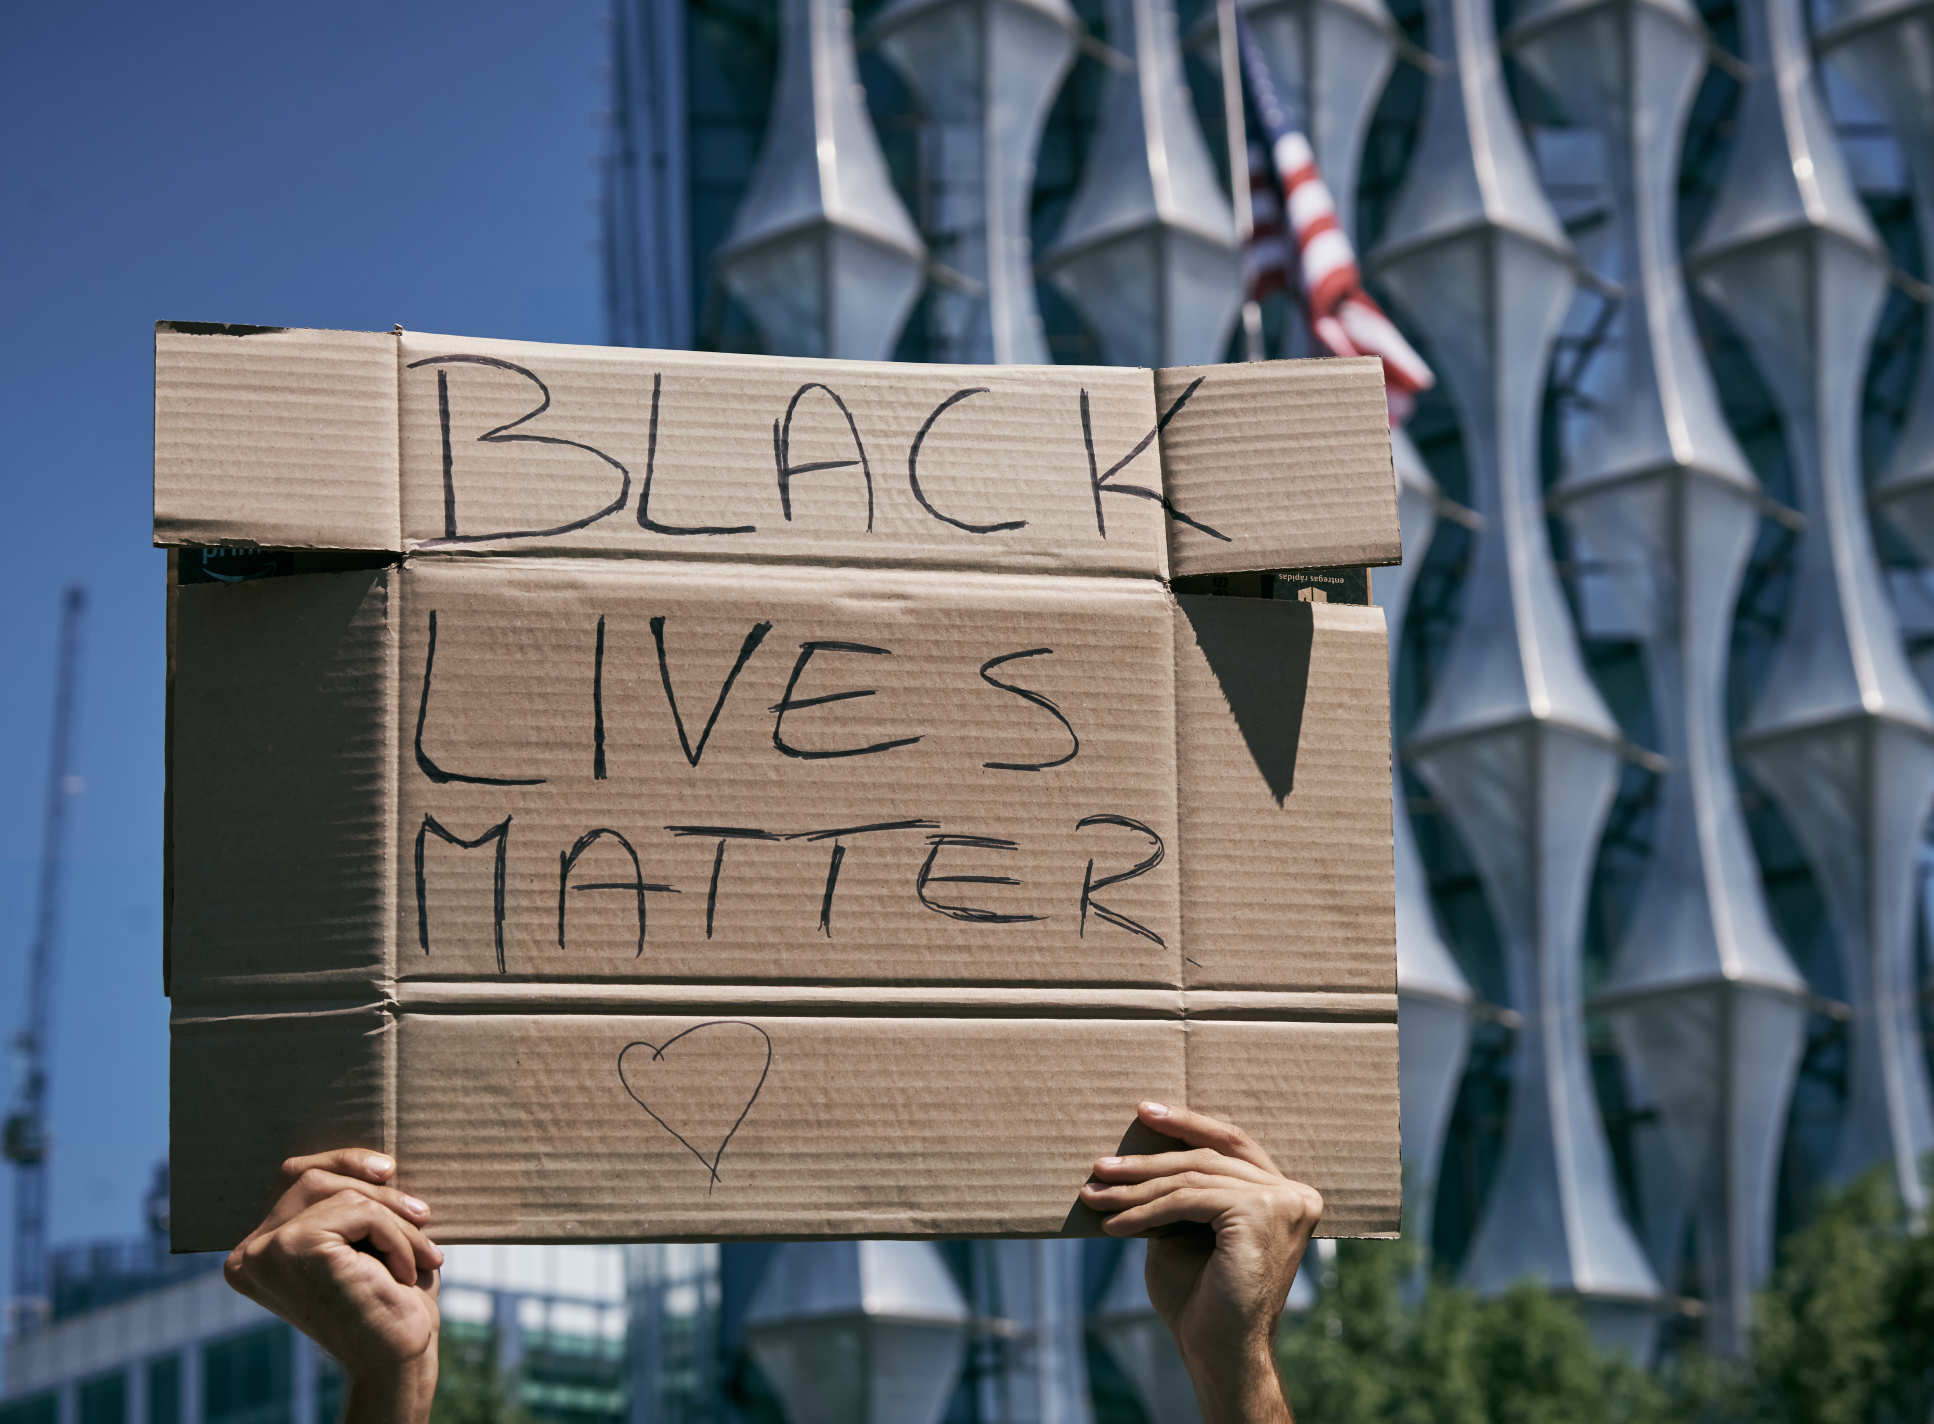 person holds up cardboard which says 'Black Lives Matter'